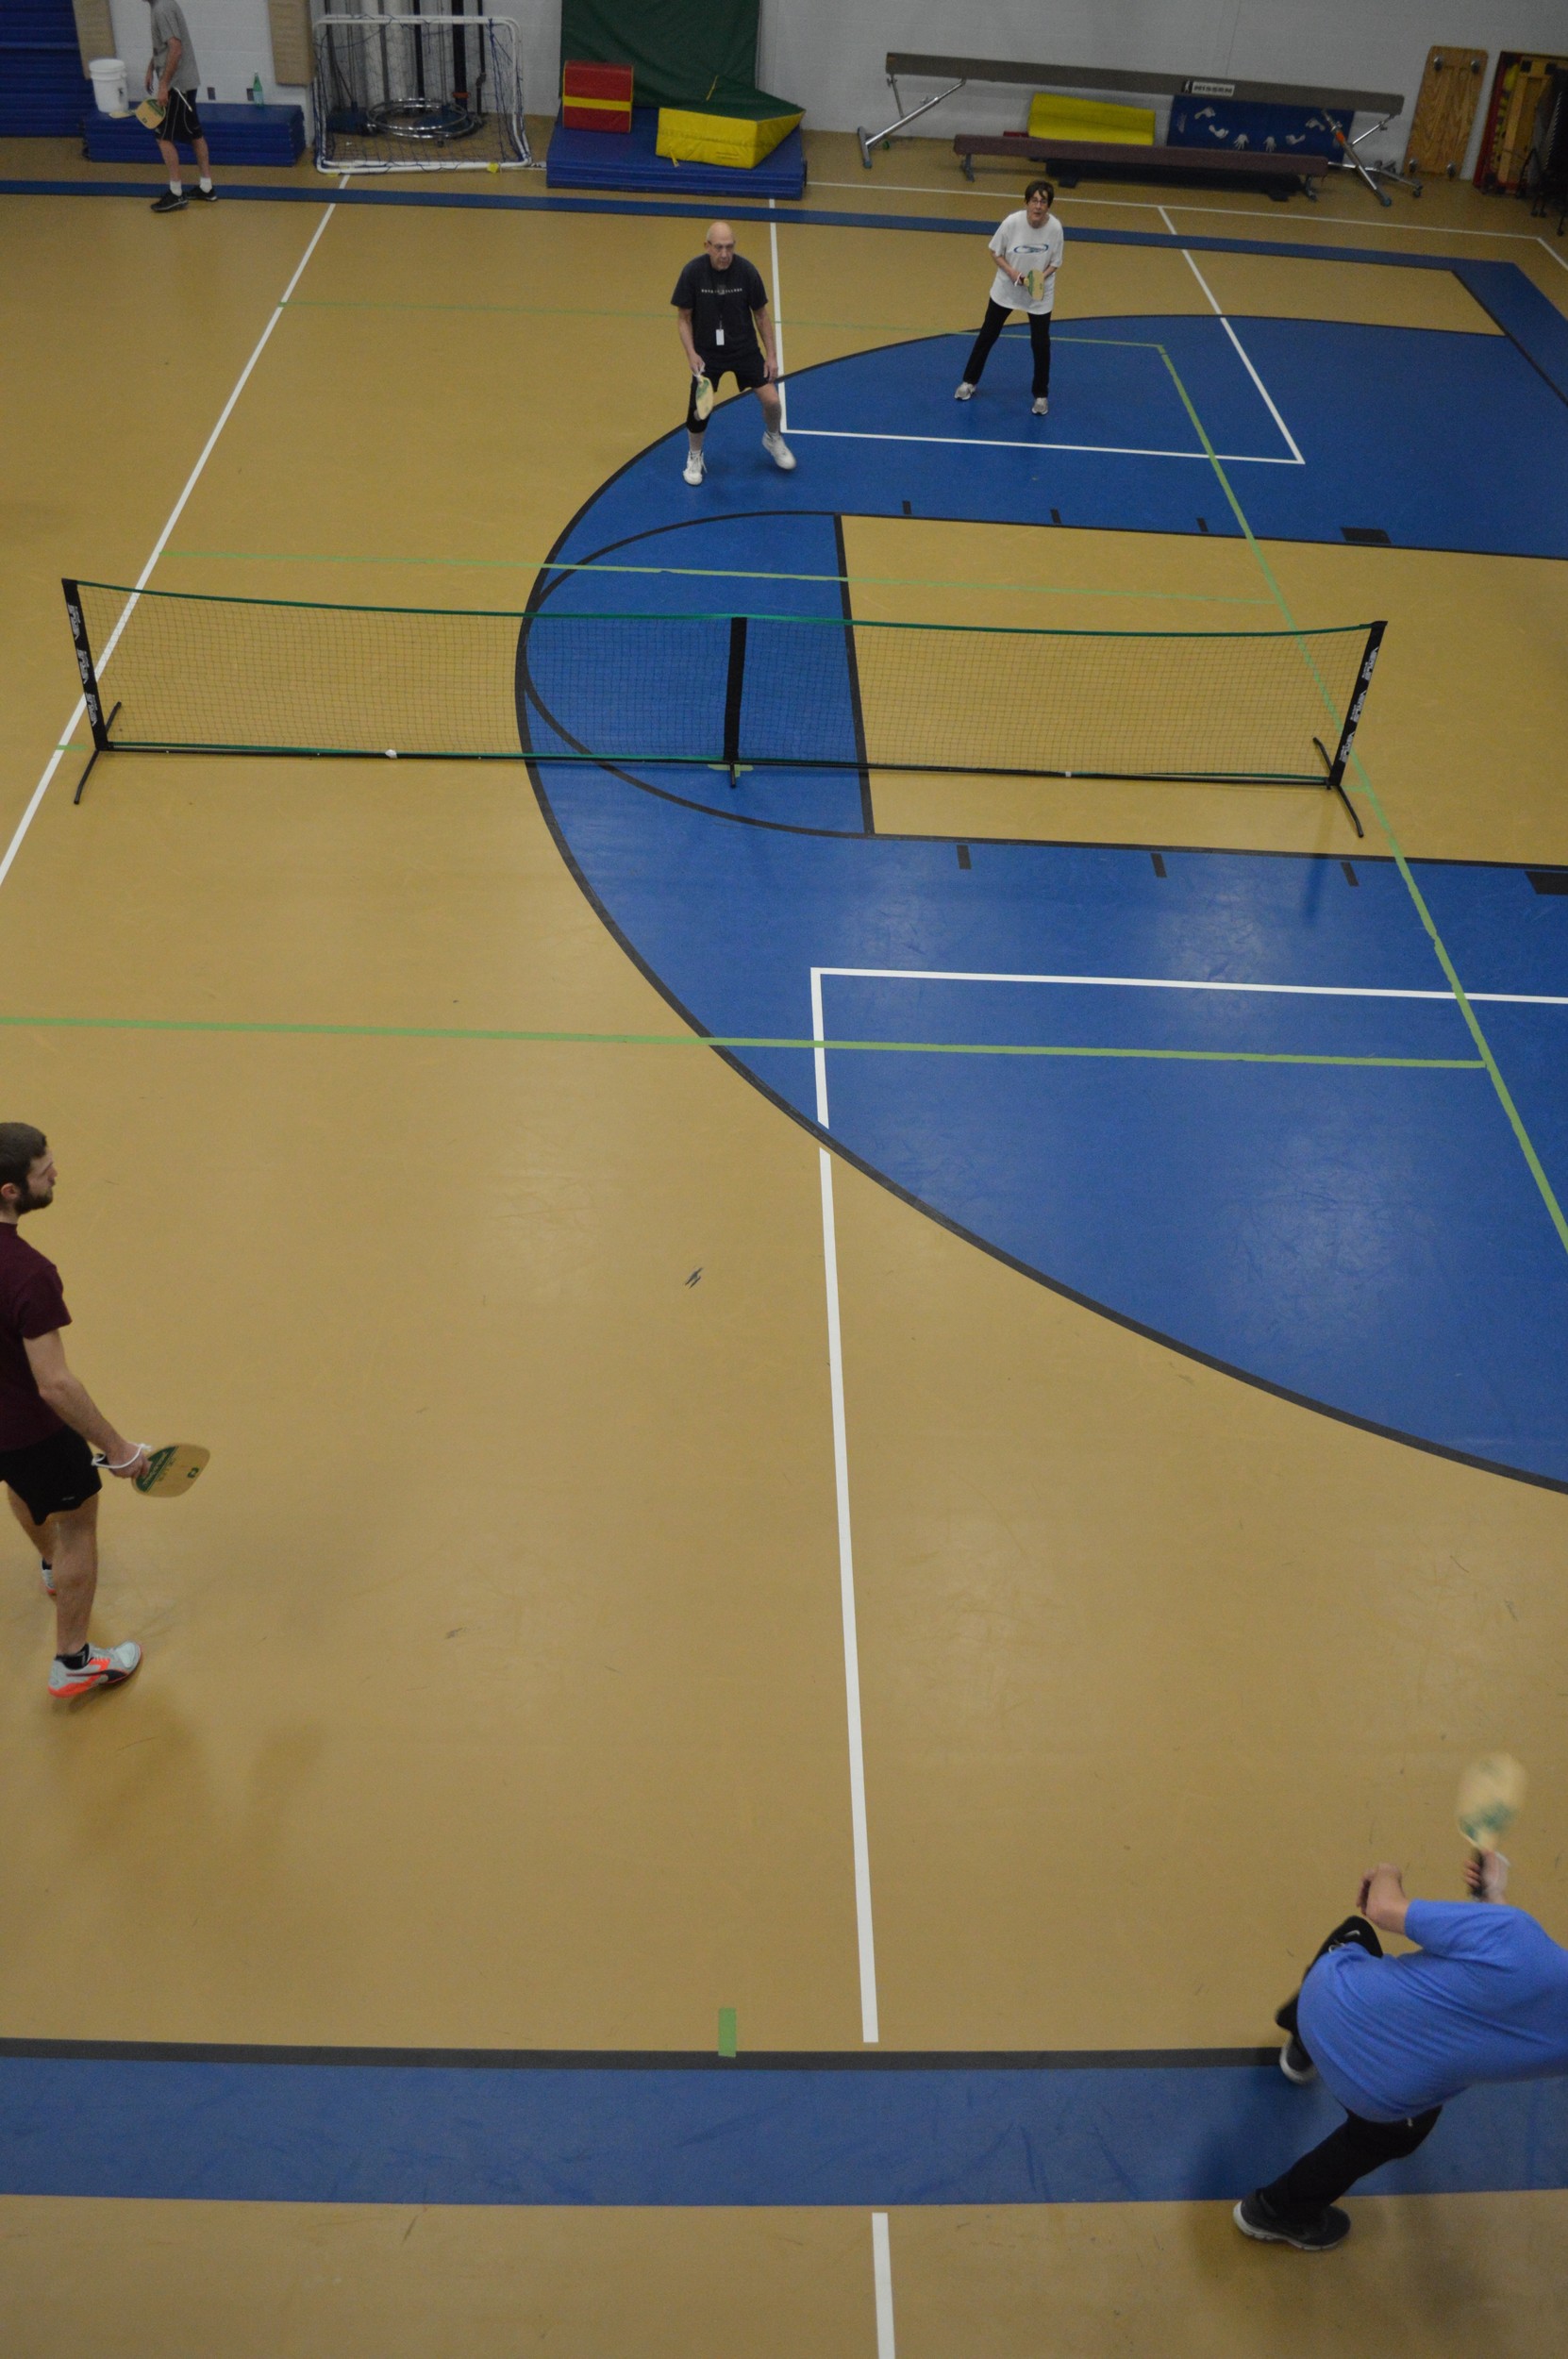 Players enjoy and evening of friendly paddleball games with seven teams of two or three players in a round robin competition.